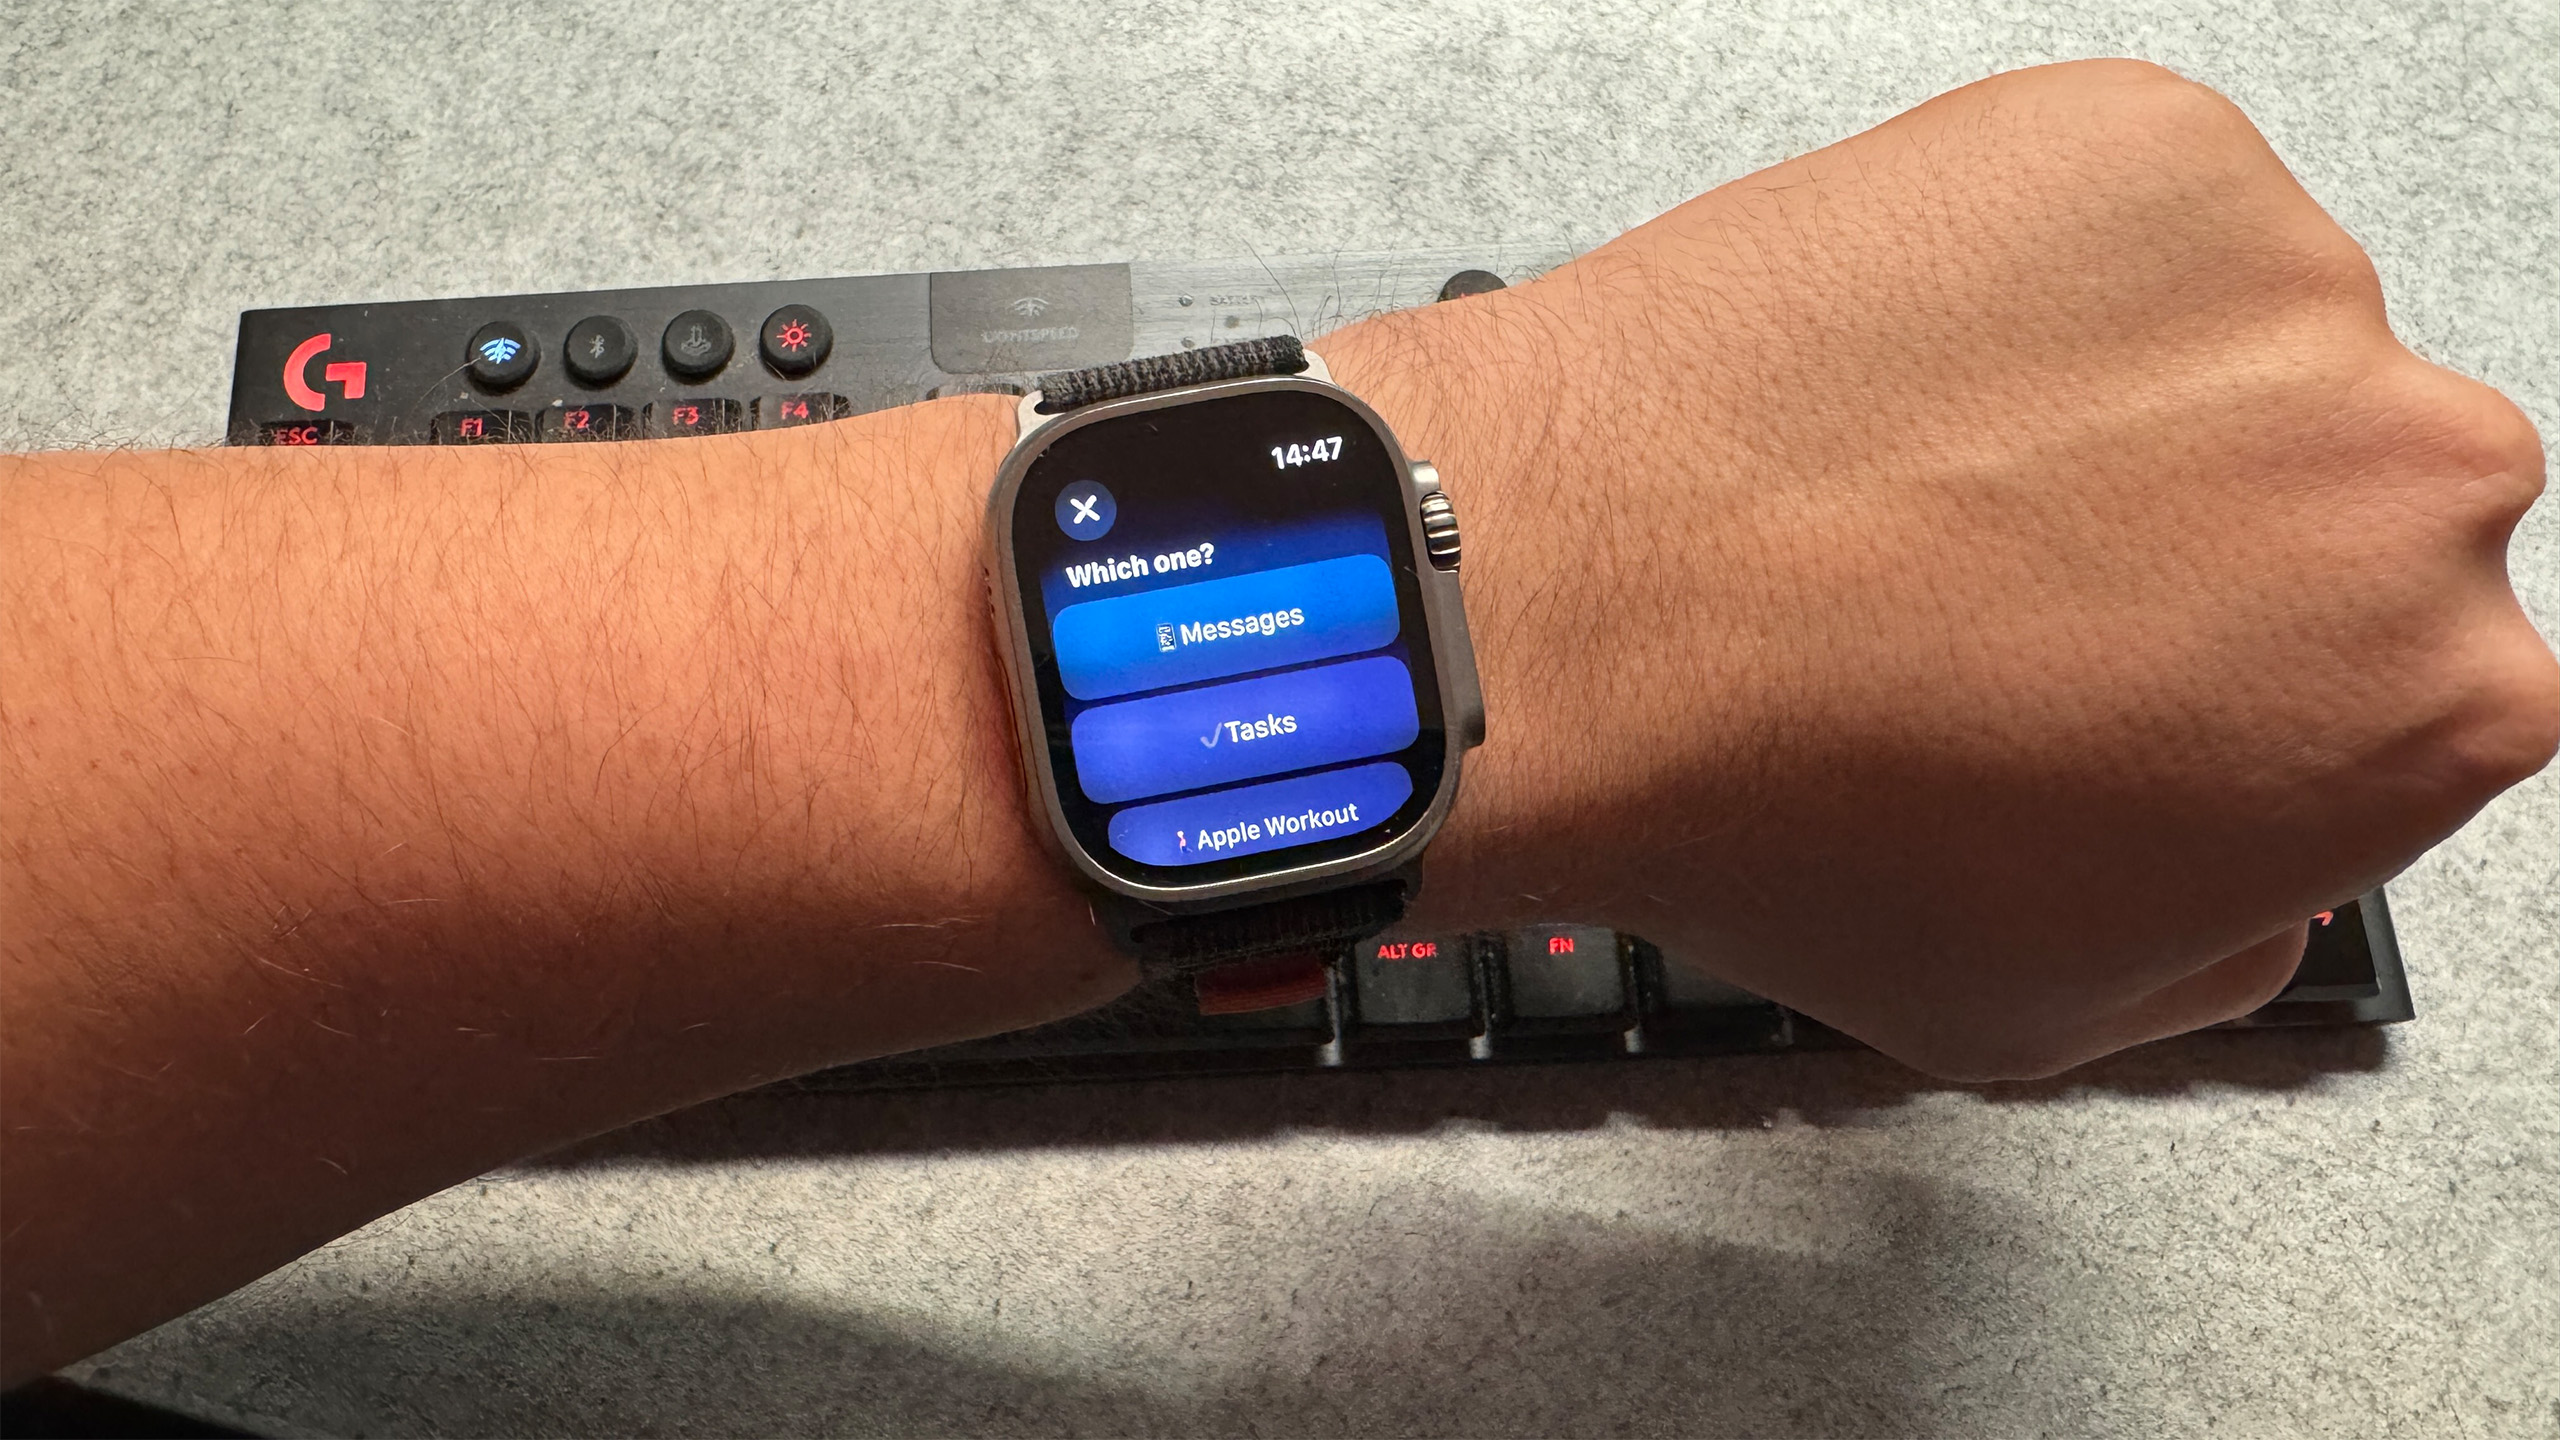 Here's my favorite Apple Watch Ultra Shortcut that takes the Action button to its limits